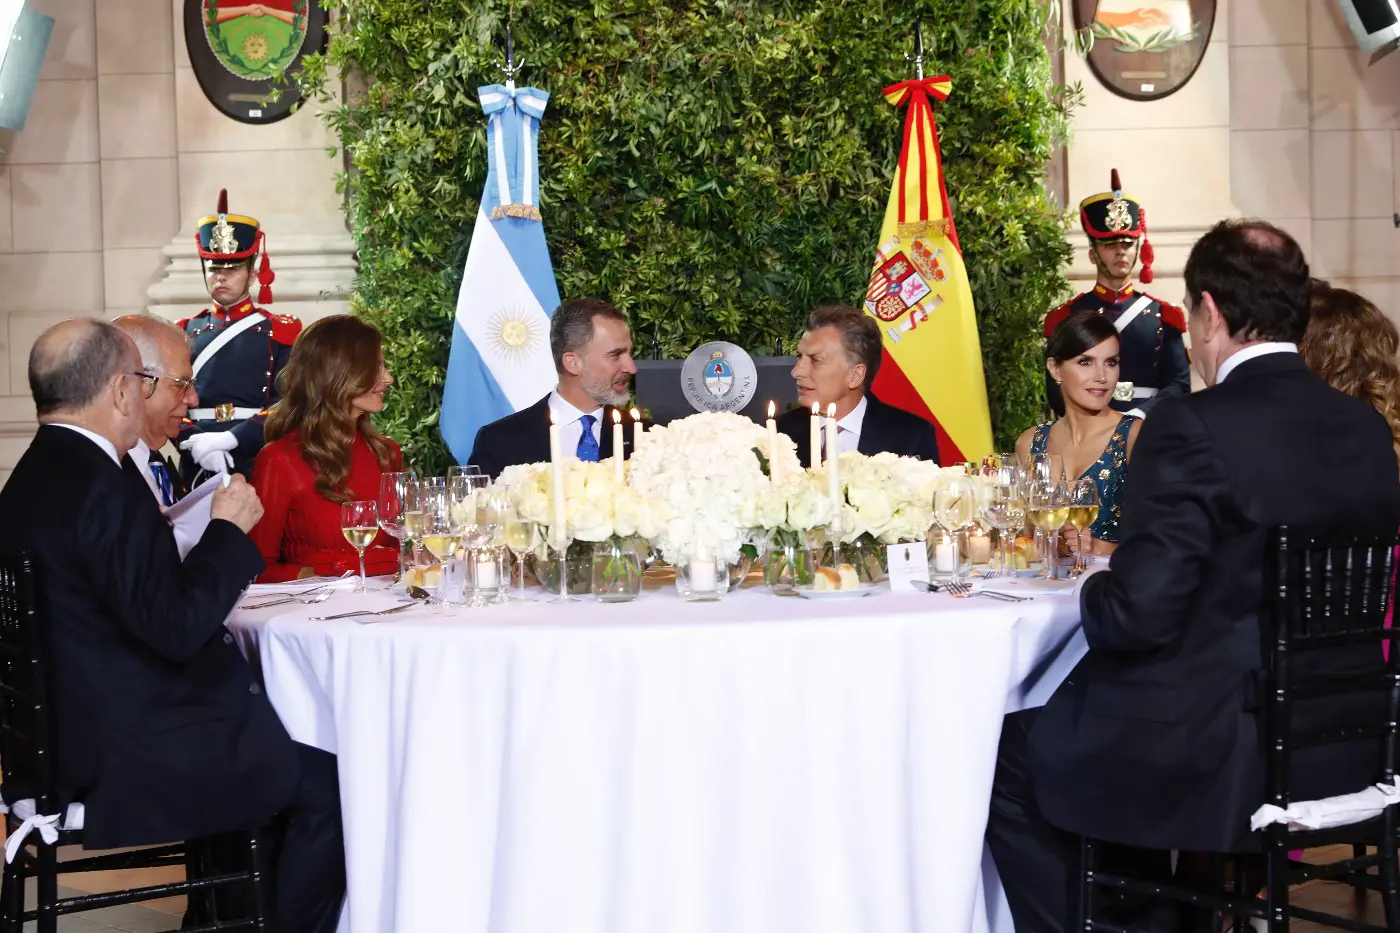 King Felipe and Queen Letizia of Spain attended Gala Dinner in Argentina